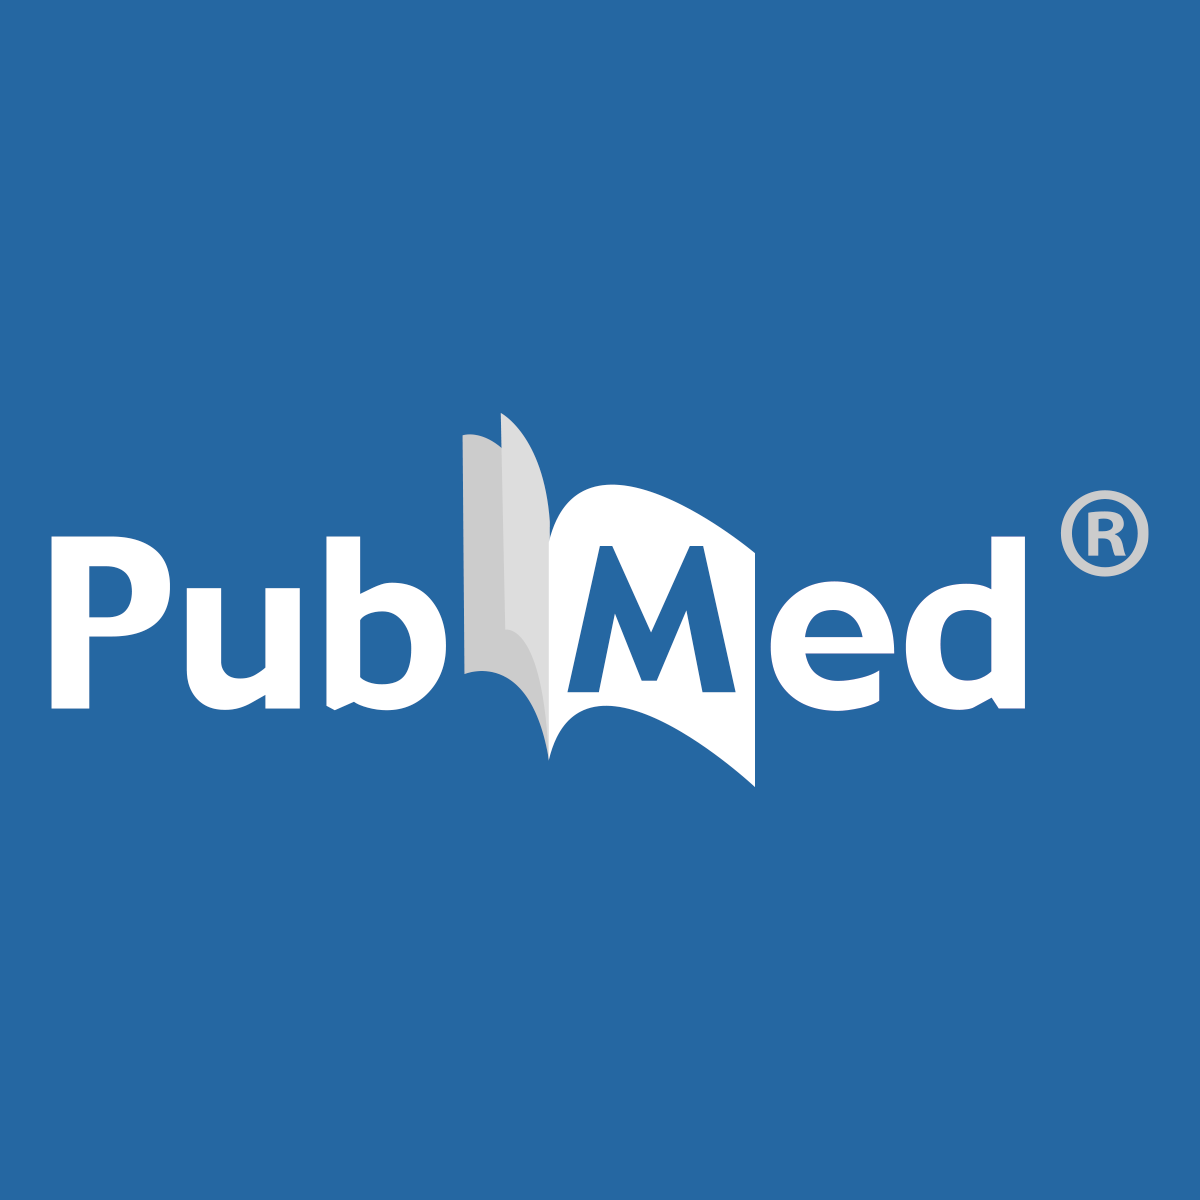 Improved Survival of Young Patients With Breast Cancer 40 Years and Younger at Diagnosis - PubMed